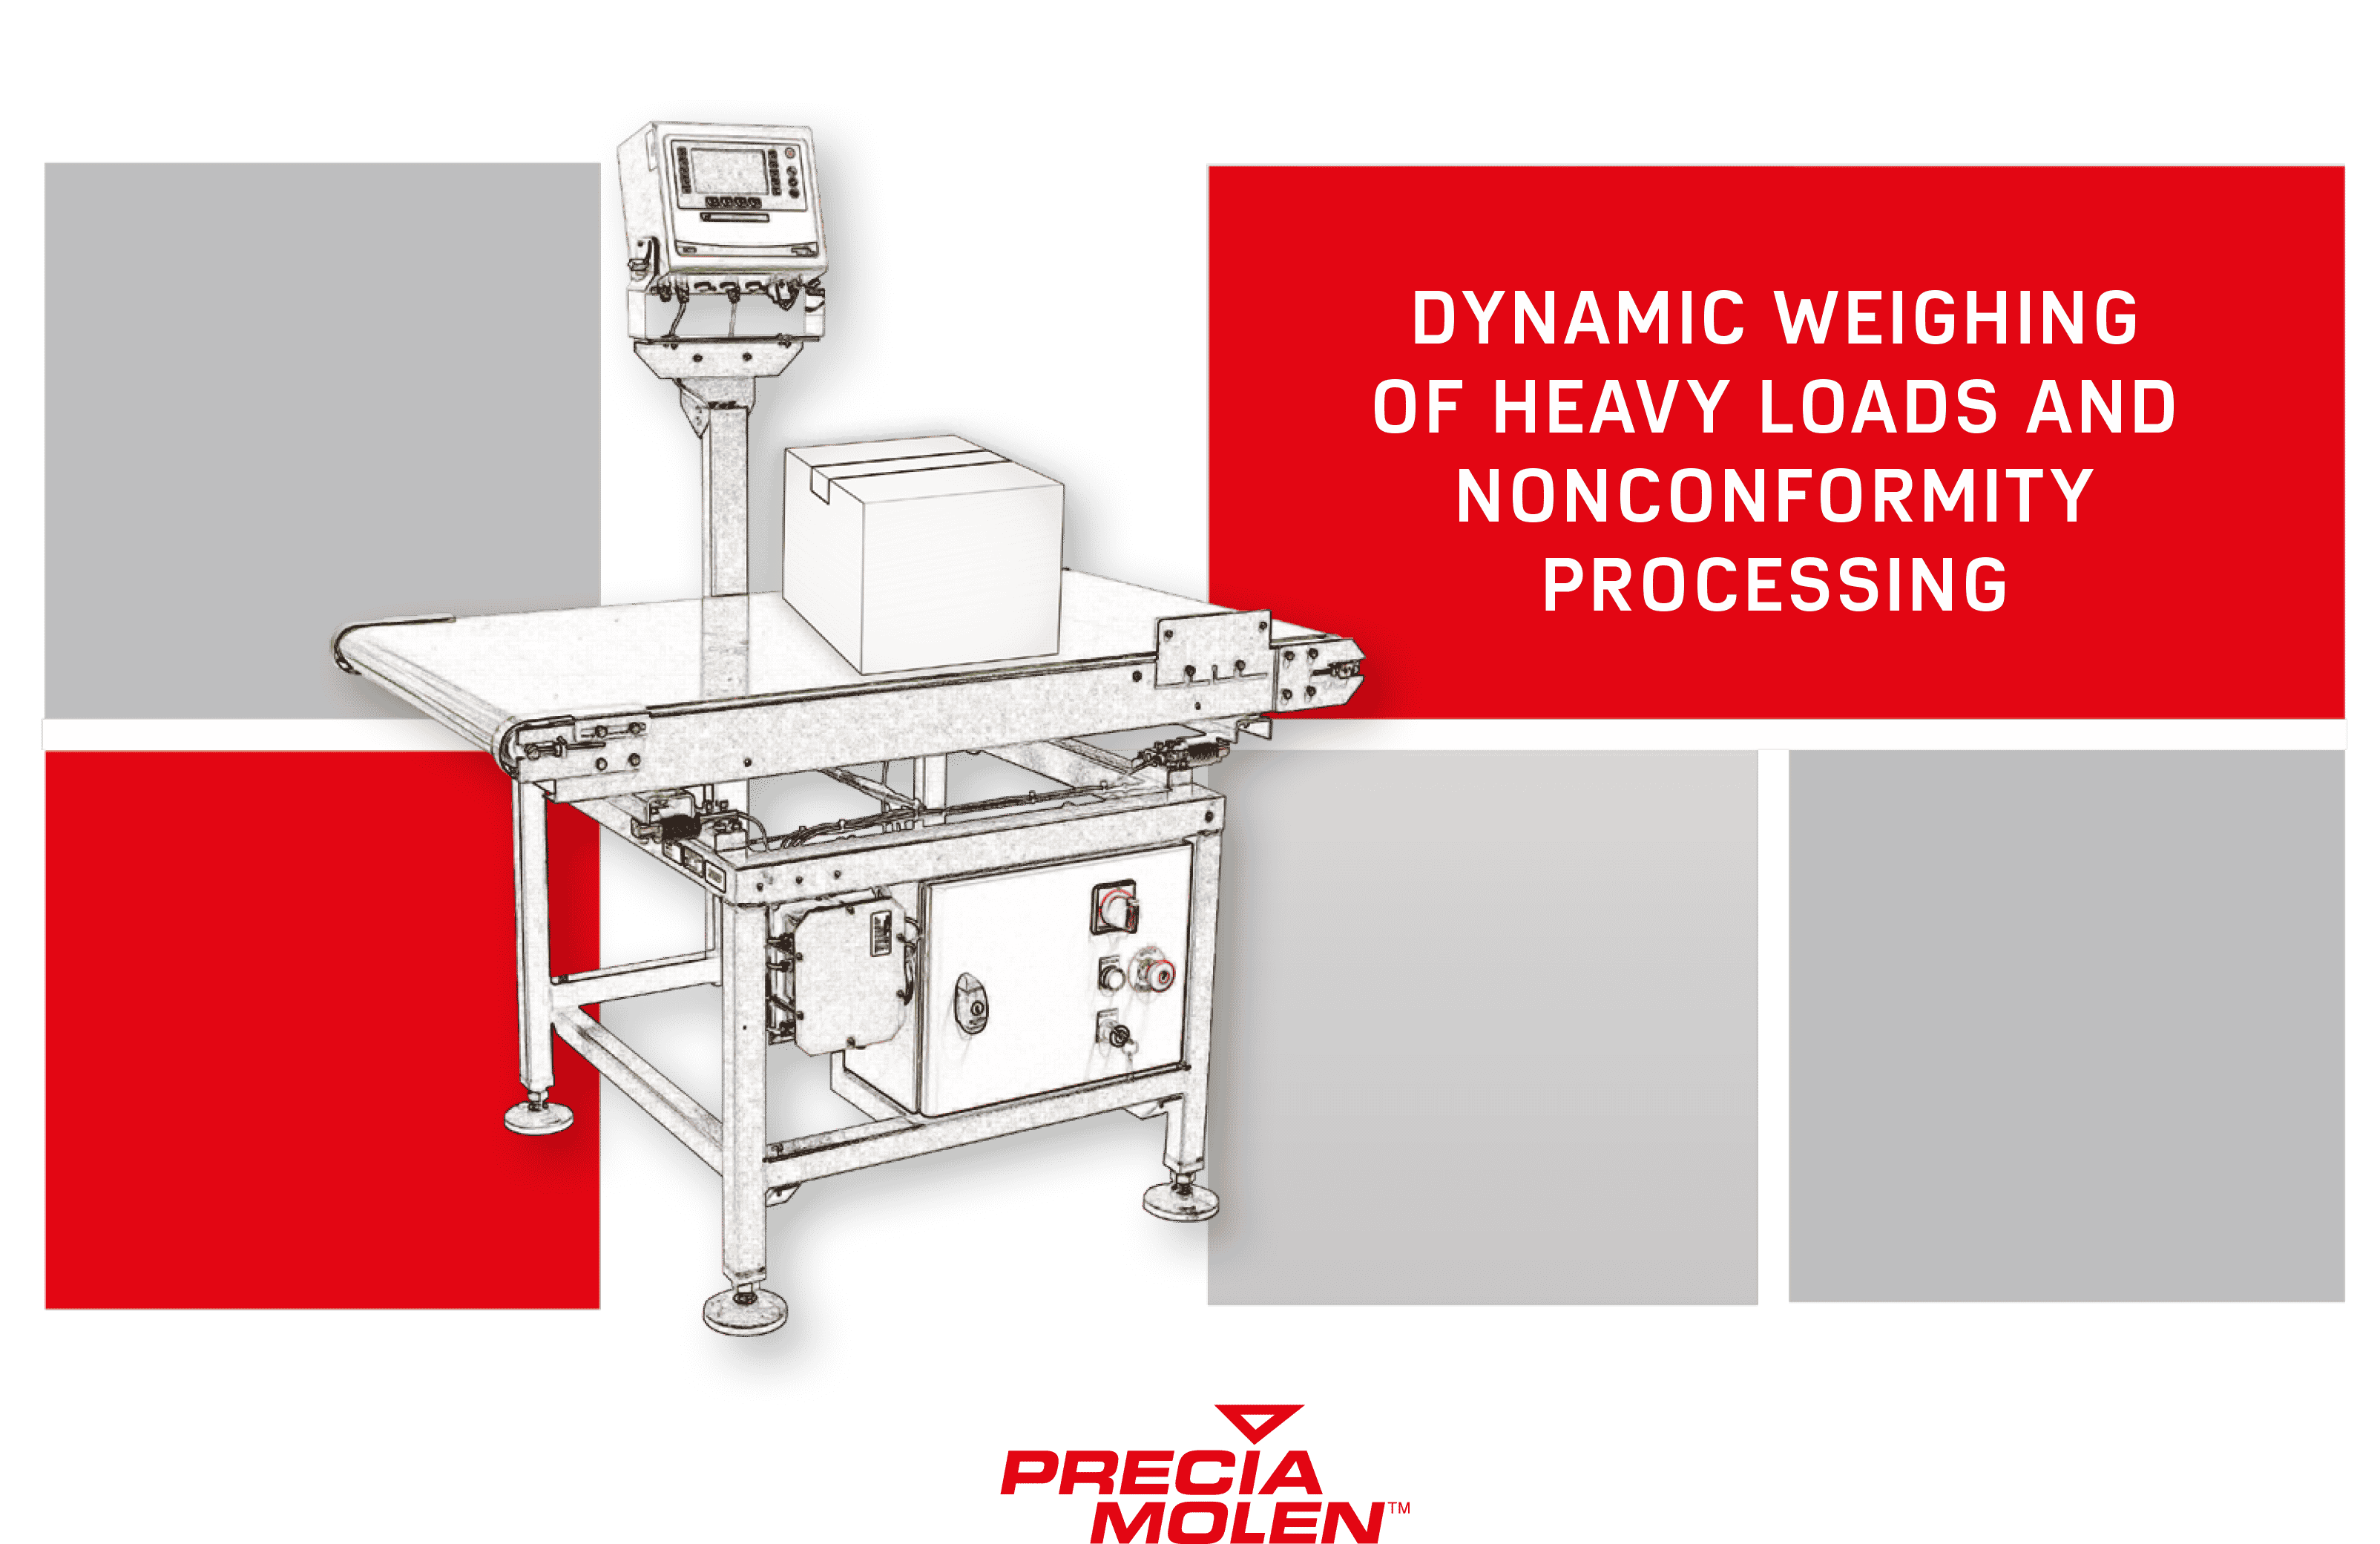 Dynamic Weighing of Heavy Loads and Processing of Nonconformities